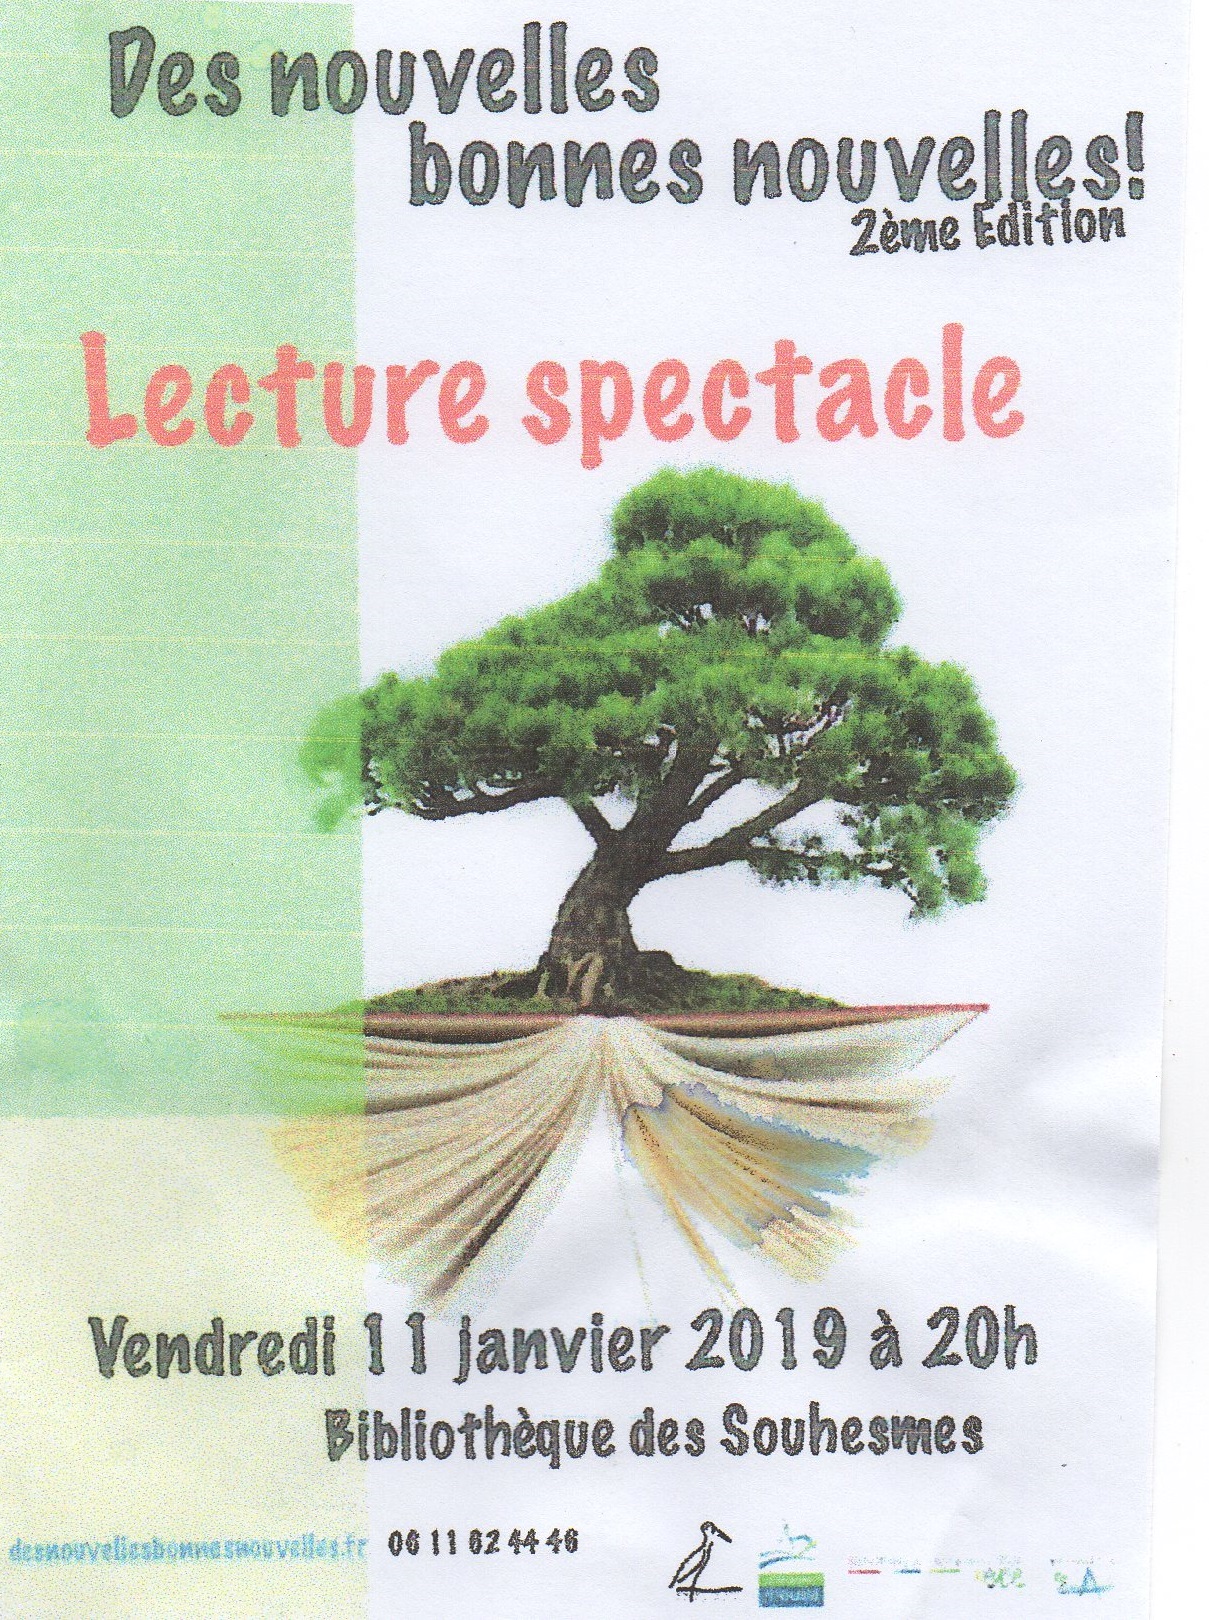 Lecture spectacle